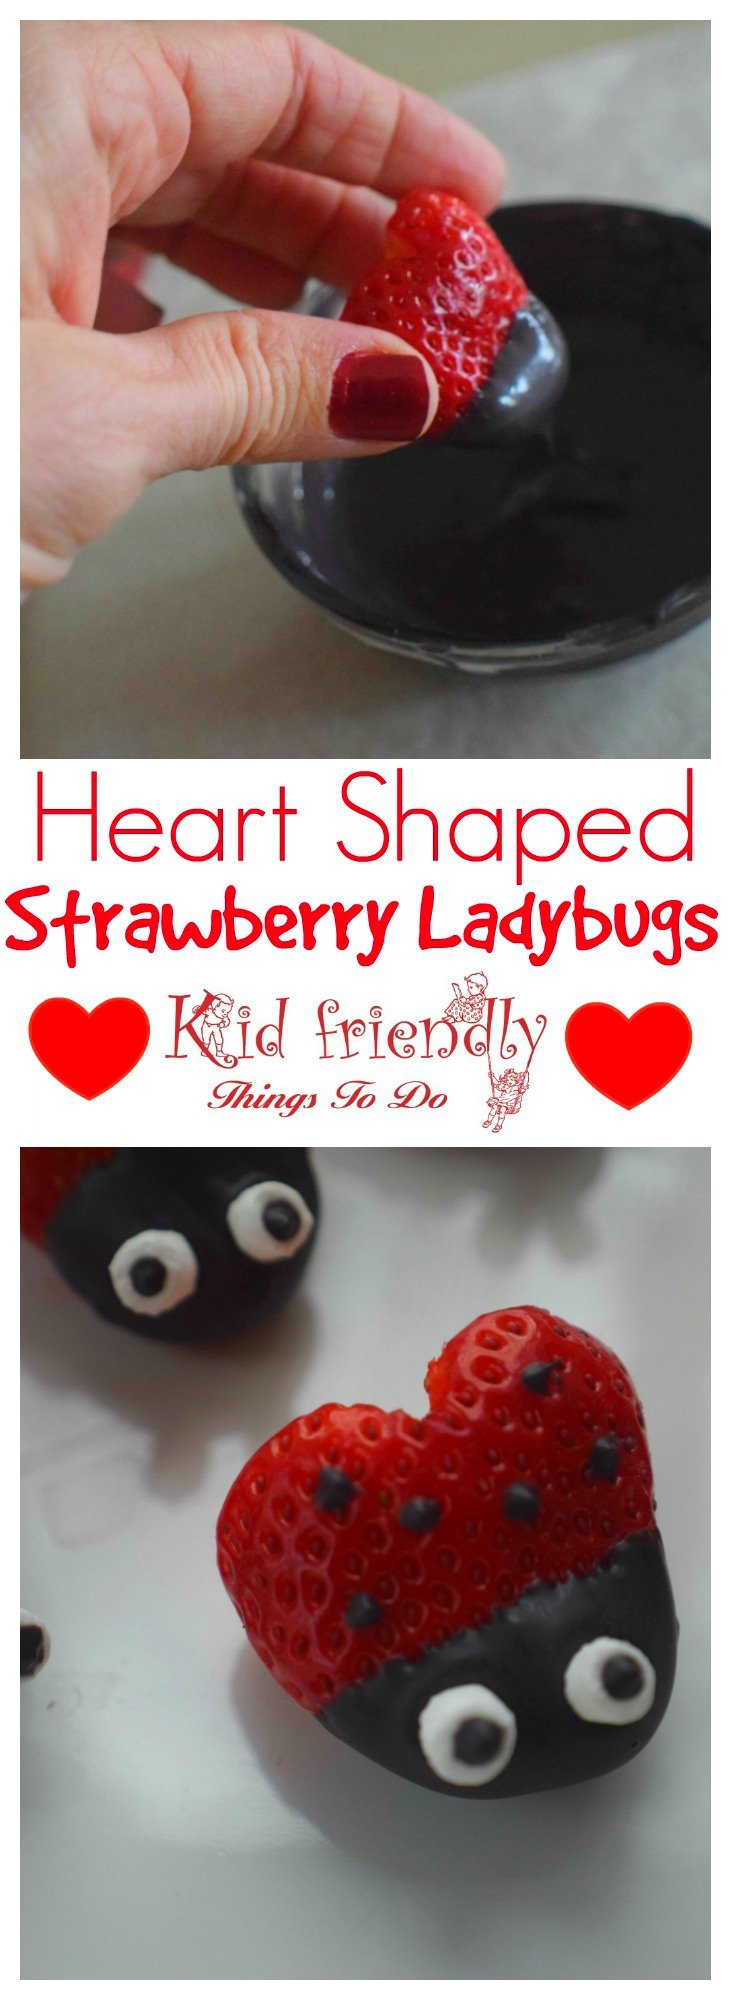 Heart shaped Chocolate Covered Strawberry Ladybugs for a fun food treat on Valentine's Day, Spring, Summer, Fairy Garden Parties or any day! Easy, Fun and delicious. Kids love 'em! www.kidfriendlythingstodo.com